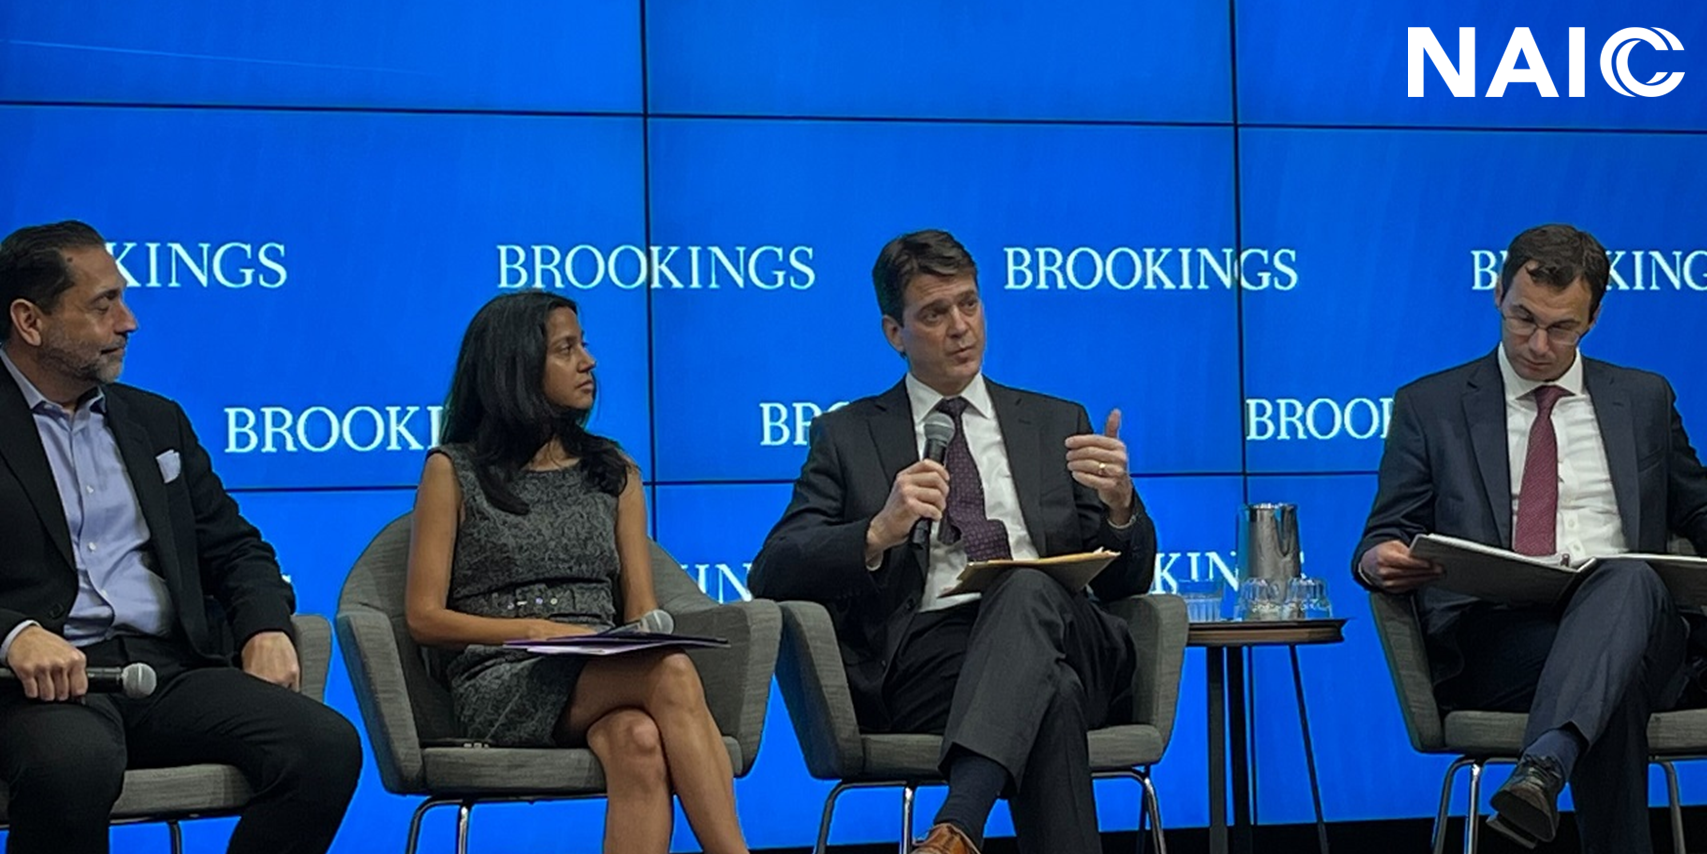 On June 27, 2023, Scott A. White, Commissioner of the Virginia Bureau of Insurance and Secretary-Treasurer of the NAIC, represented the NAIC on a Brookings Institution panel discussion on "Assessing Insurance Regulation and Supervision of Climate-Related Financial Risk."